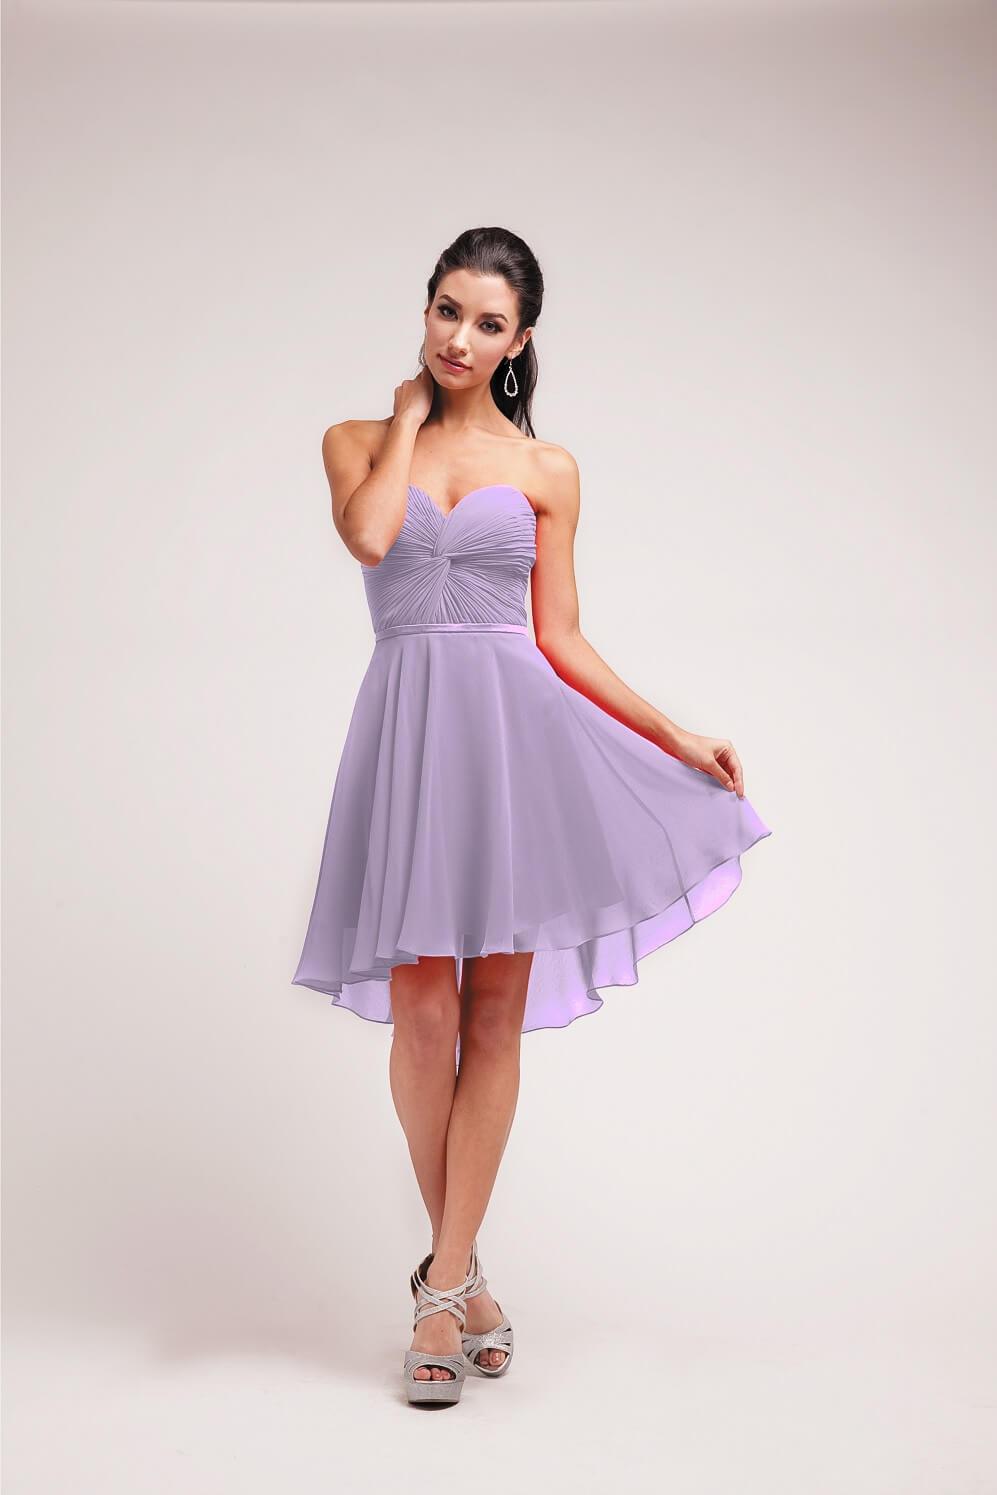 Prom High Low Strapless Chiffon Bridesmaids Dress - The Dress Outlet Cinderella Divine